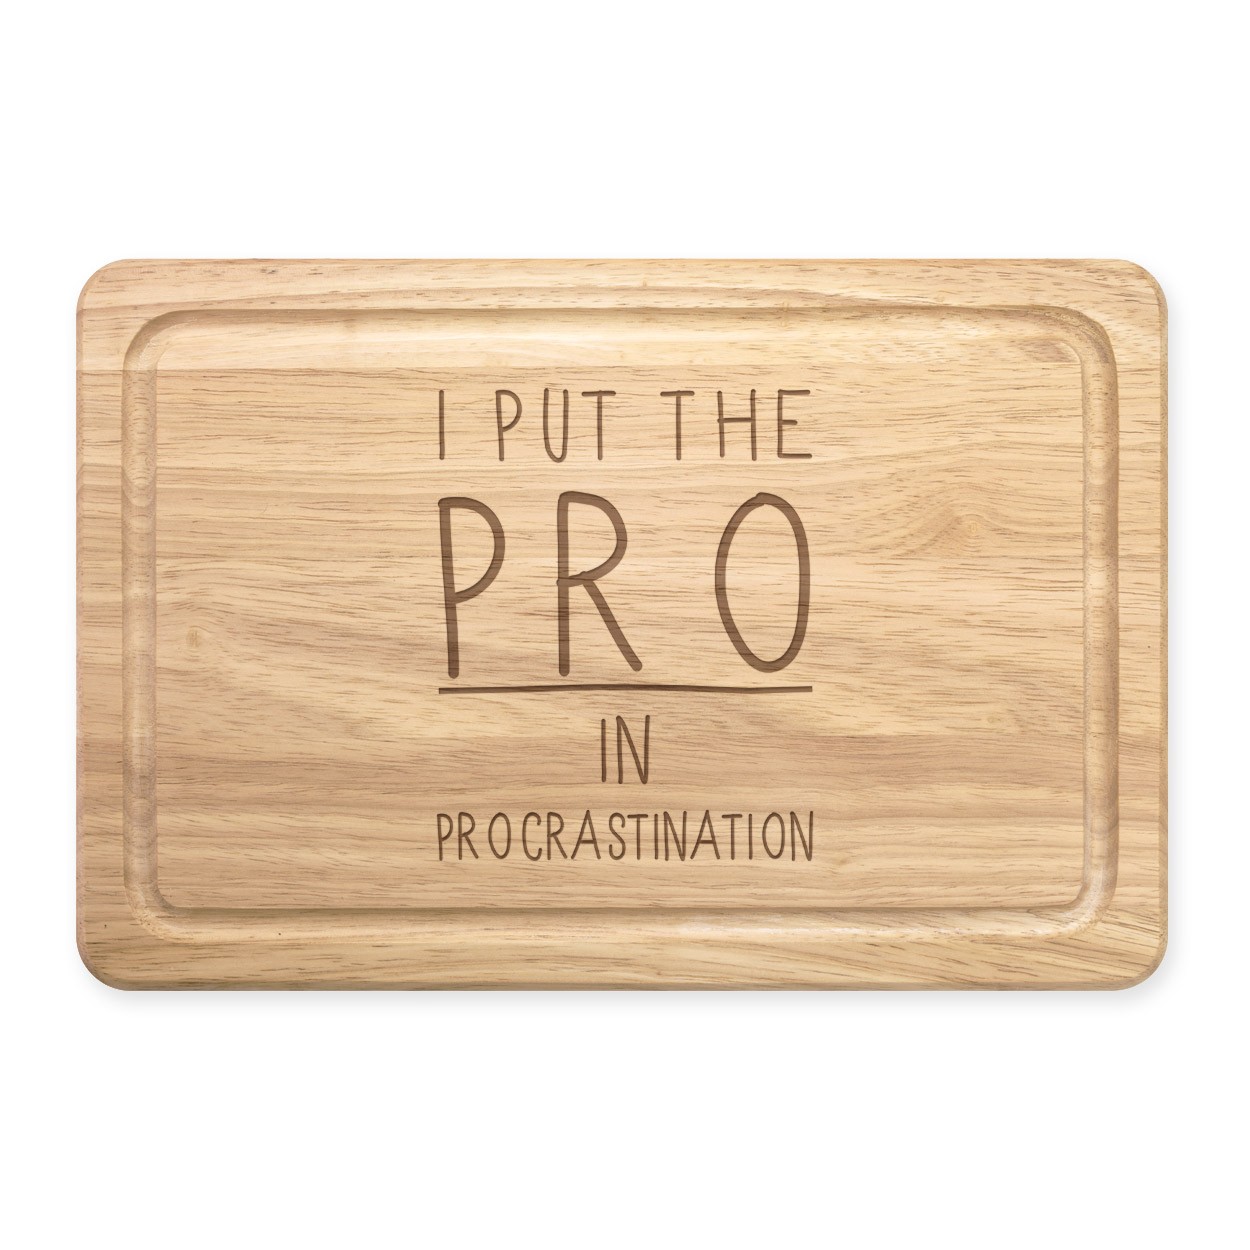 I Put The Pro In Procrastination Rectangular Wooden Chopping Board